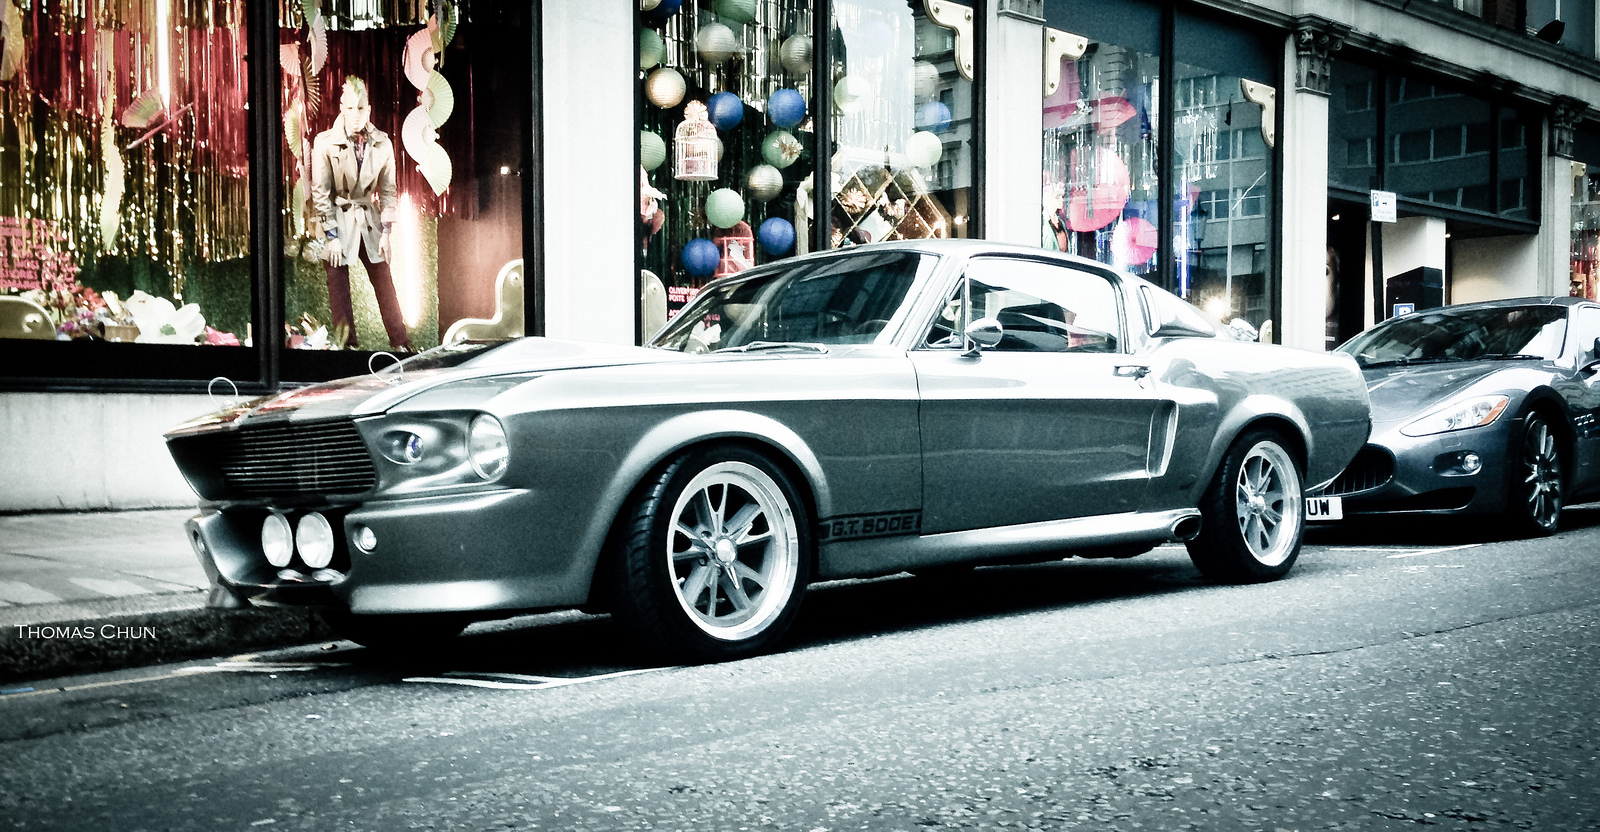 1967 Shelby Mustang GT500E Eleanor | Flickr - Photo Sharing!